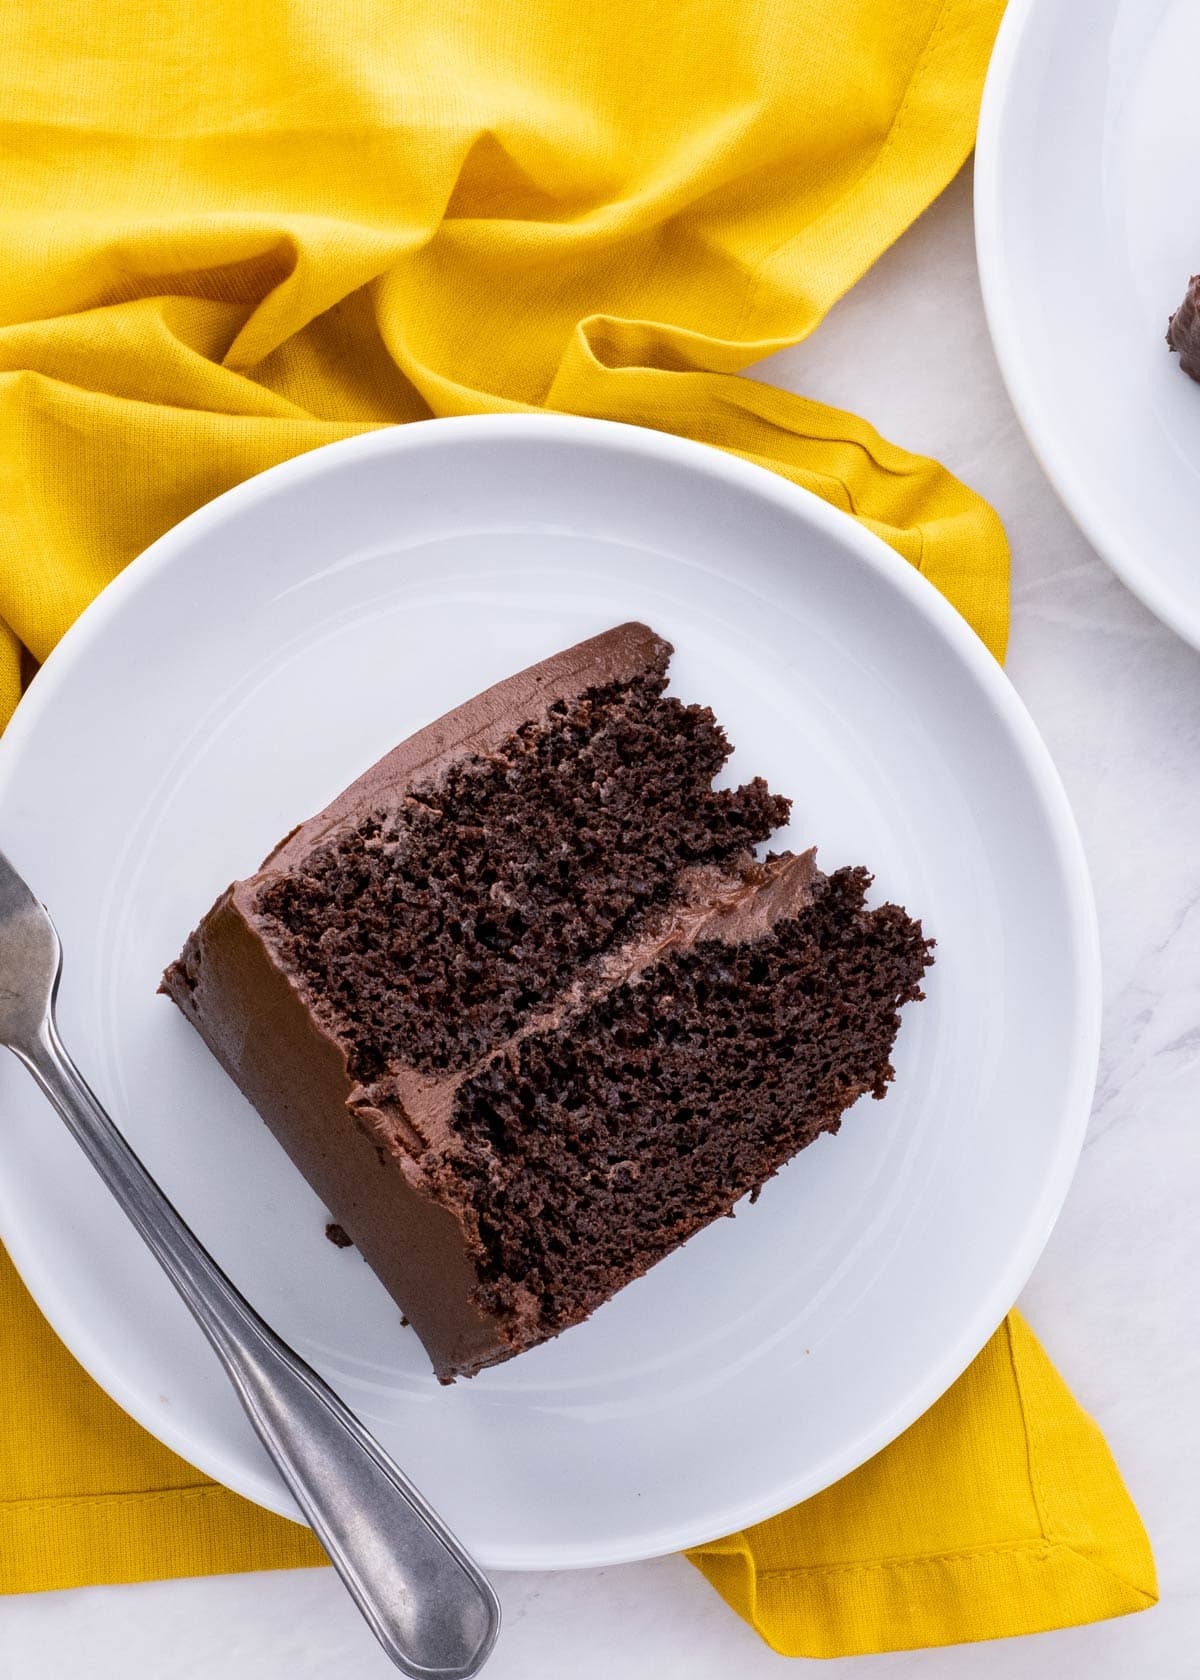 Chocolate Cake Slice on plate with fork